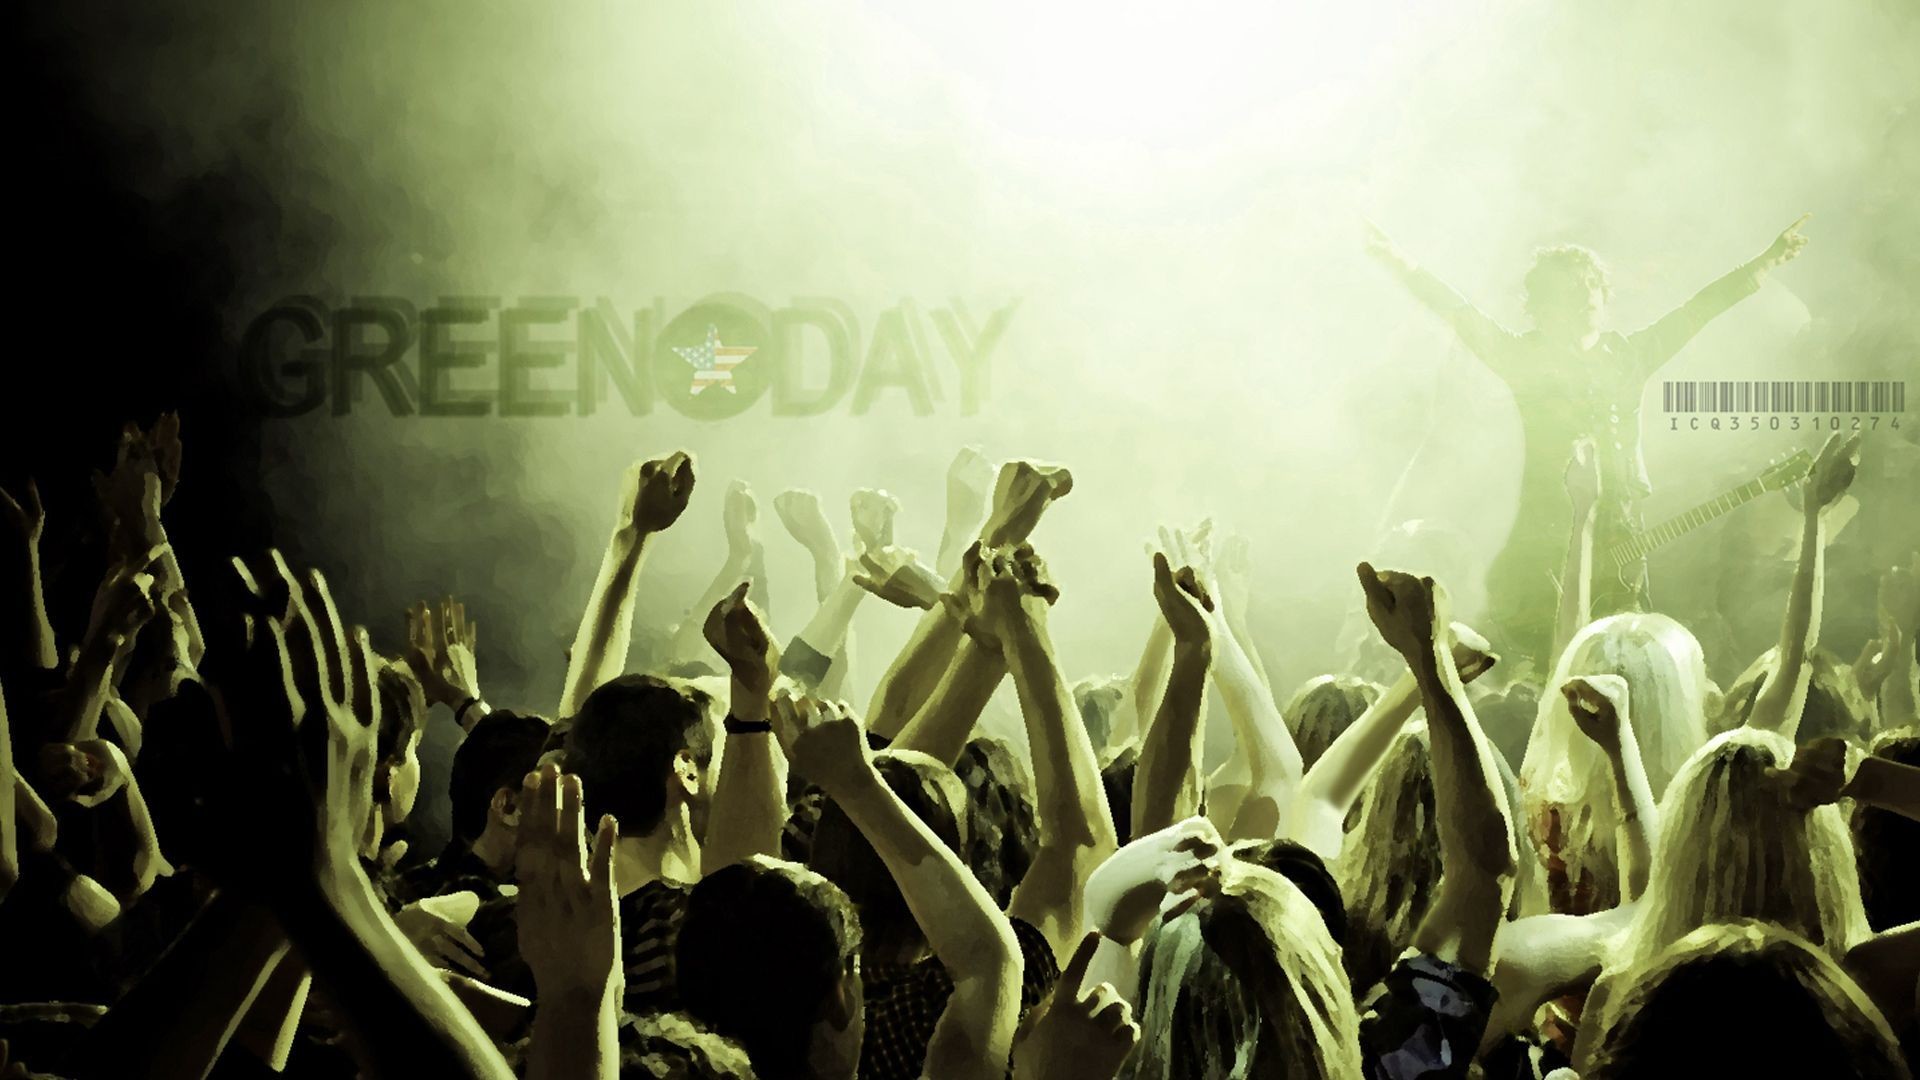 1920x1080 Green Day HD Wallpapers